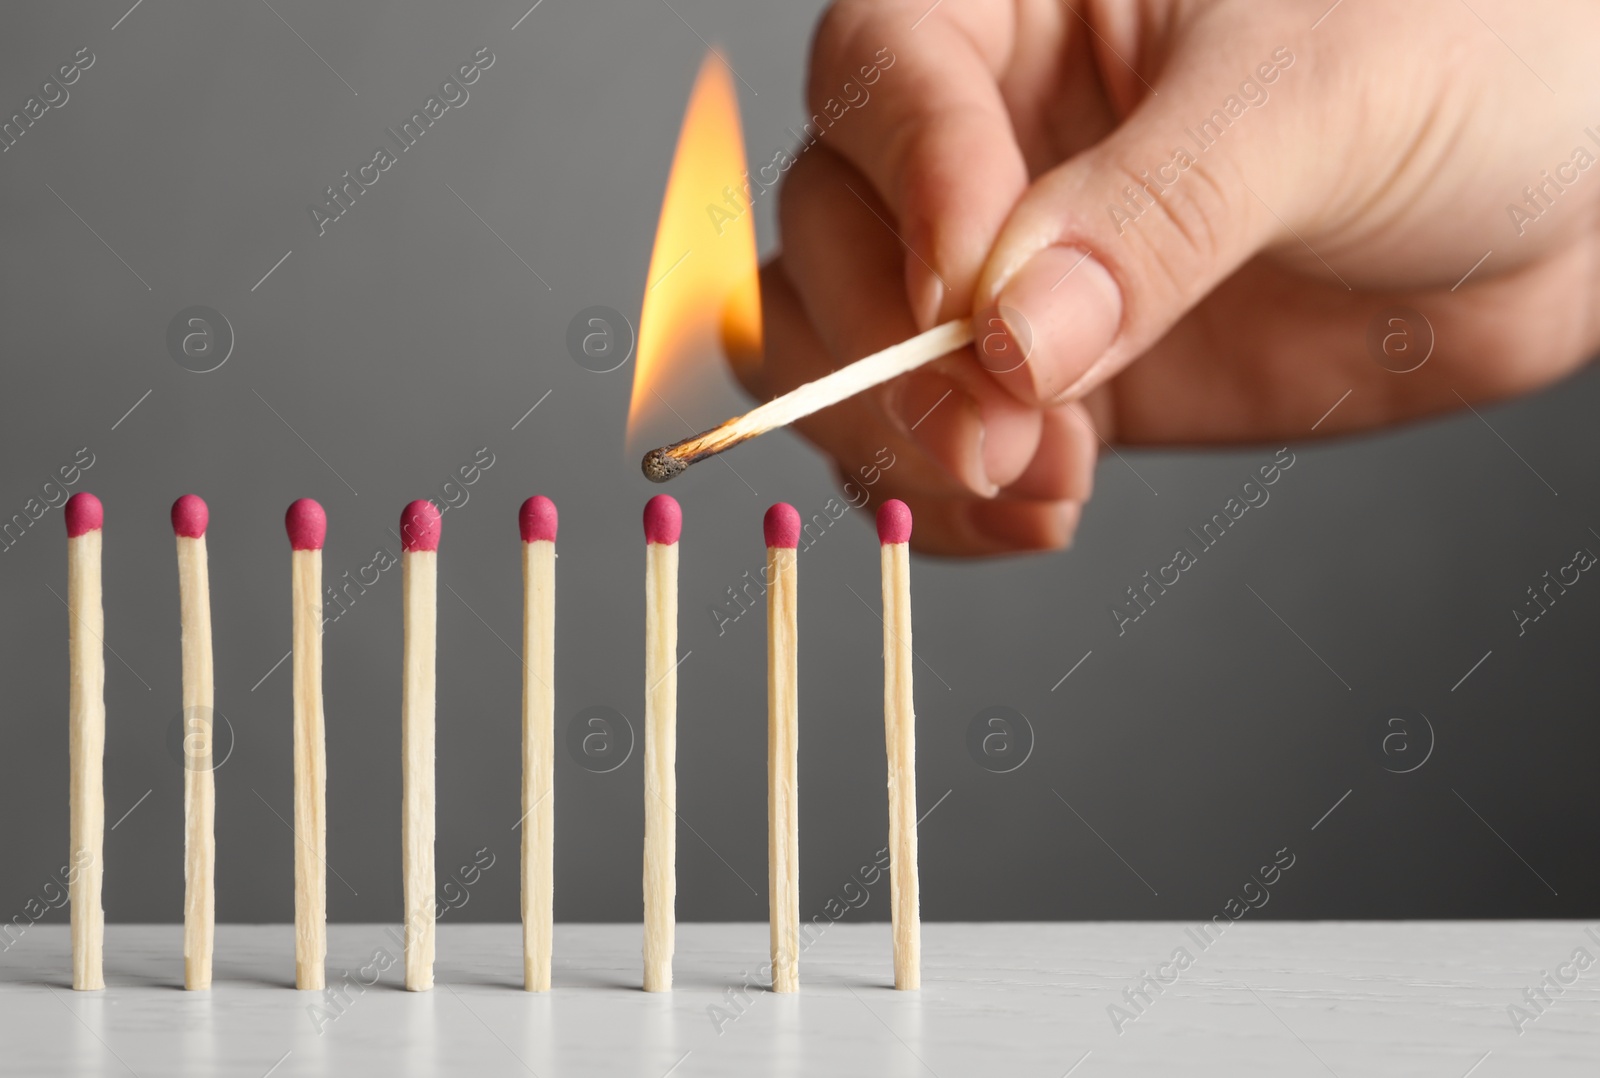 Photo of Woman igniting line of matches on table against grey background, closeup